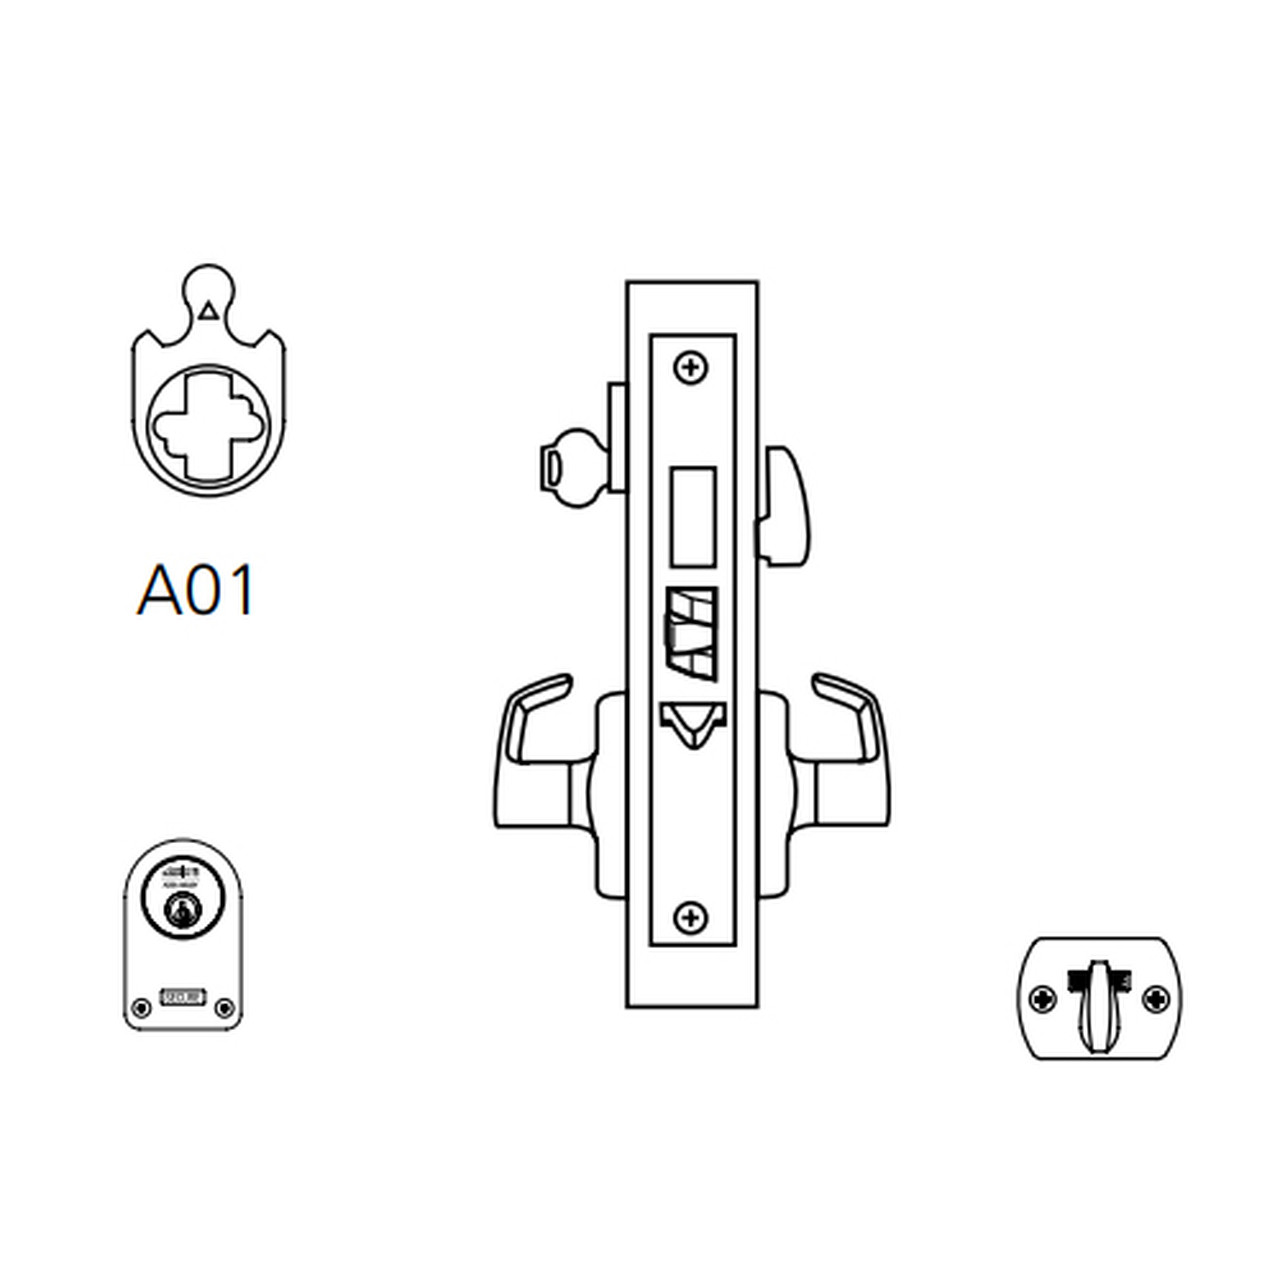 ML2075-LSR-605-CL6 Corbin Russwin ML2000 Series IC 6-Pin Less Core Mortise Entrance or Office Security Locksets with Lustra Lever and Deadbolt in Bright Brass